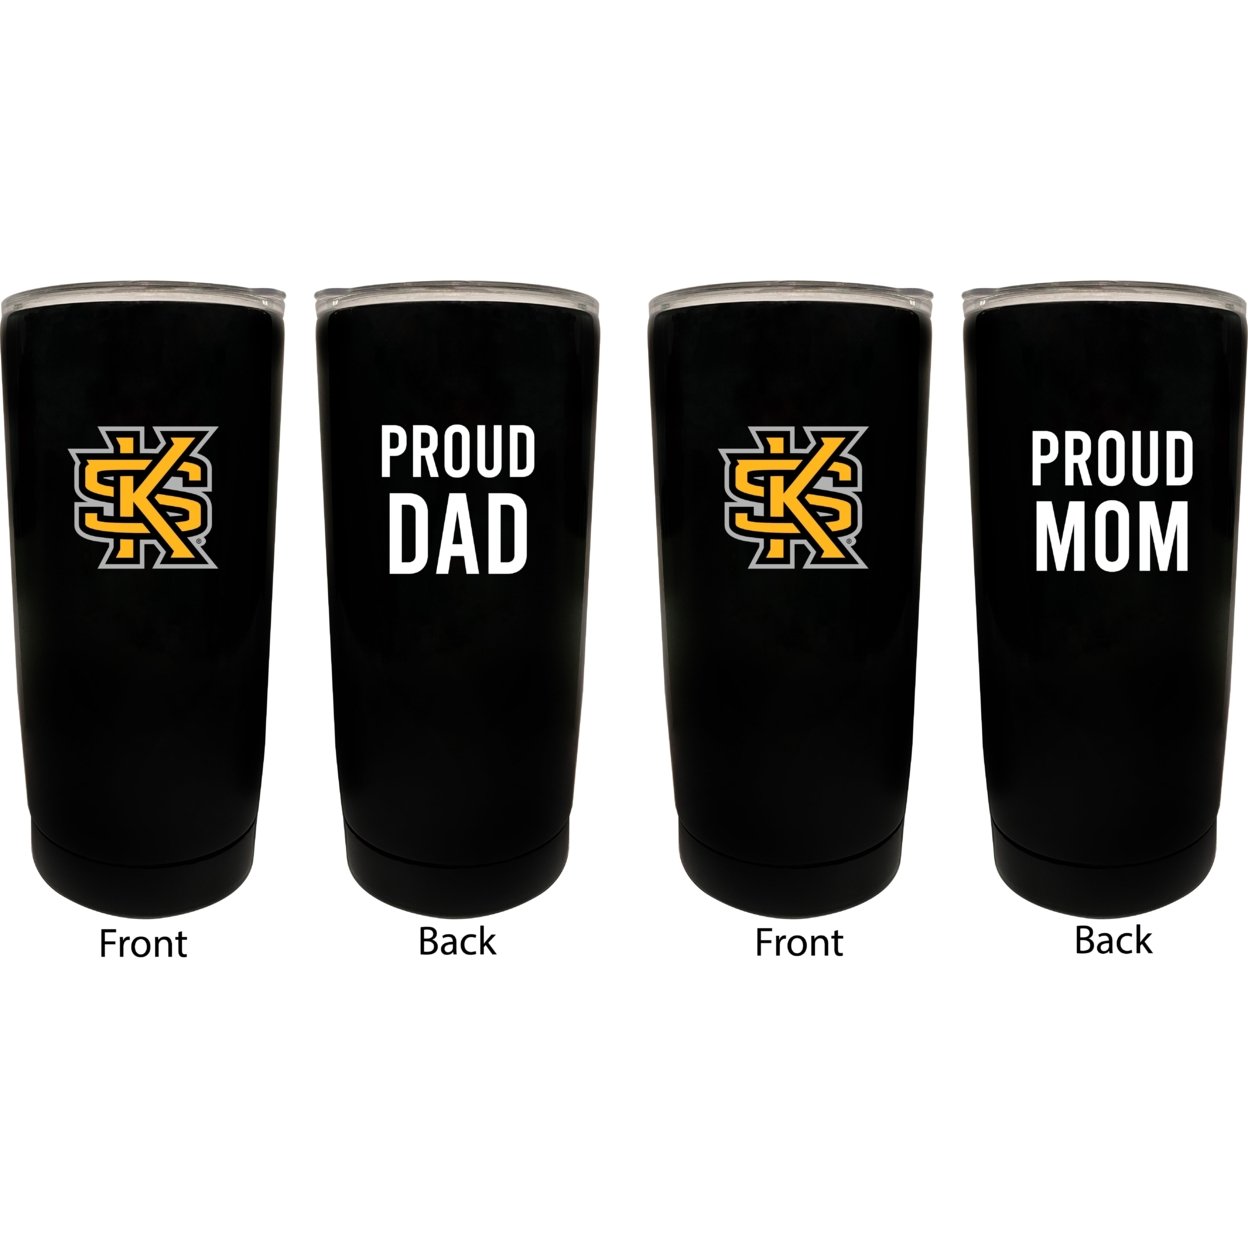 Kennesaw State Unviersity Proud Mom And Dad 16 Oz Insulated Stainless Steel Tumblers 2 Pack Black.